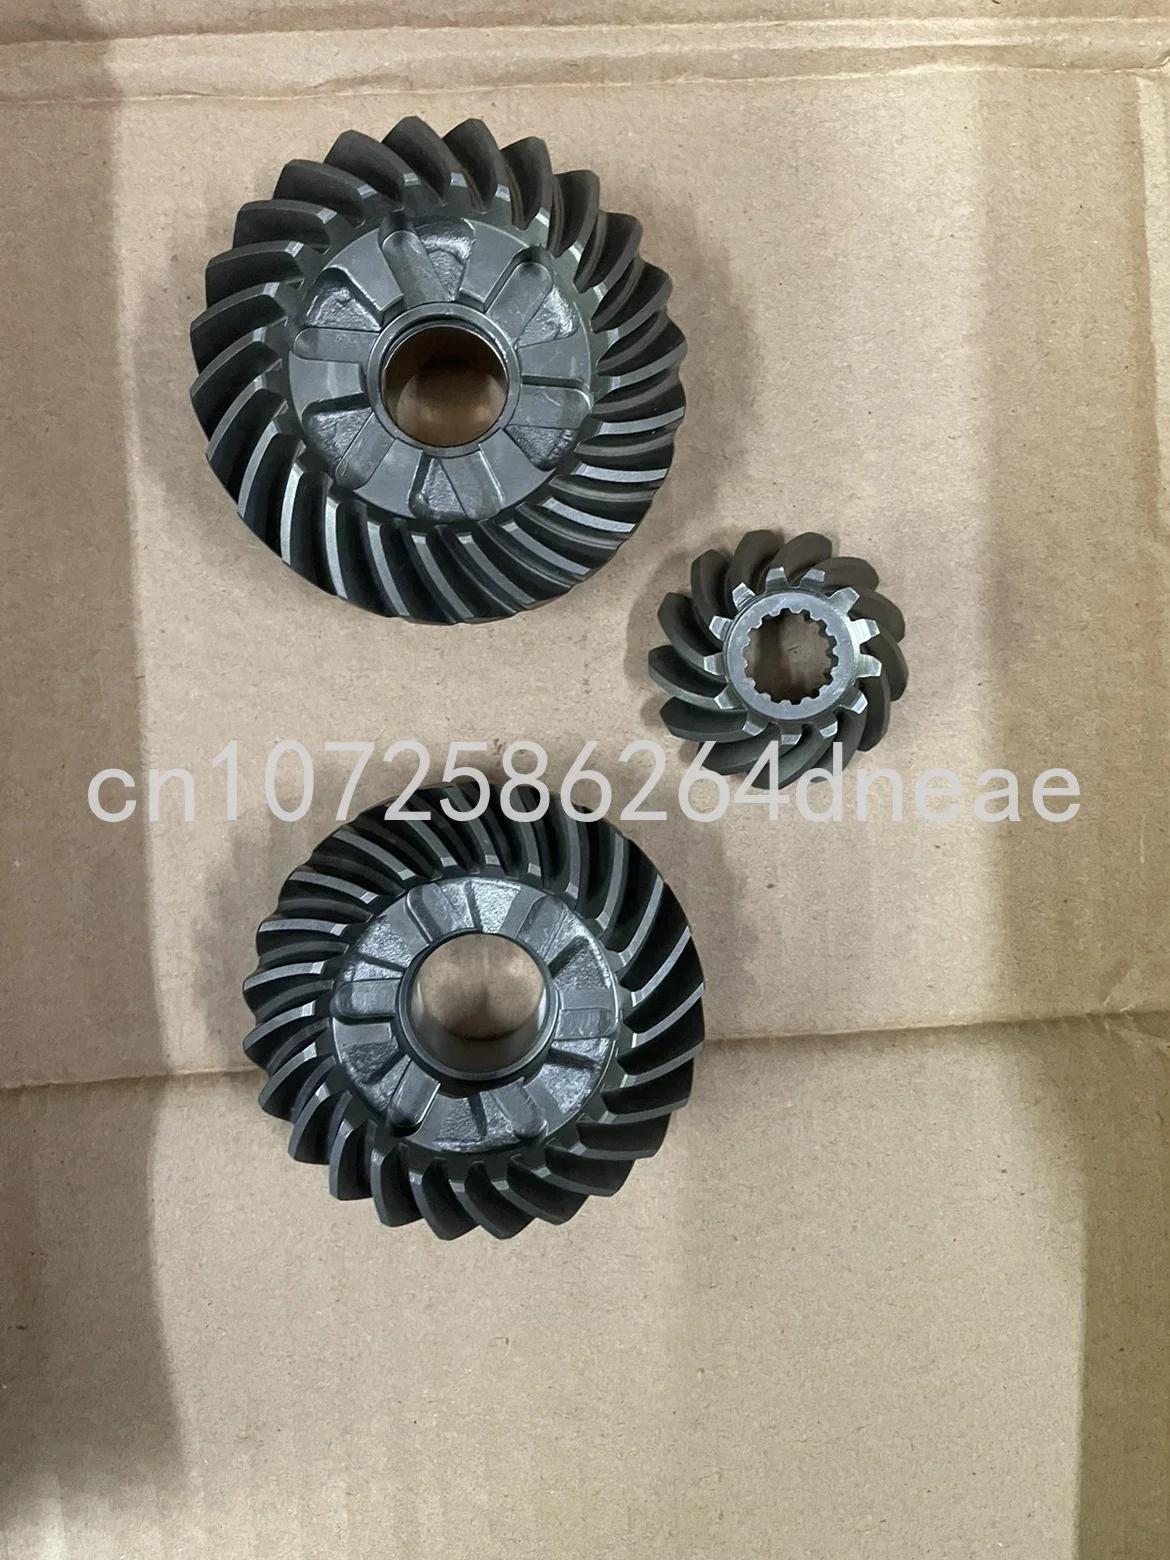 

Gear Components for Yamaha Yum Outboard, 4-Stroke 50/60 Horsepower Gearbox, A Set of Gear Components